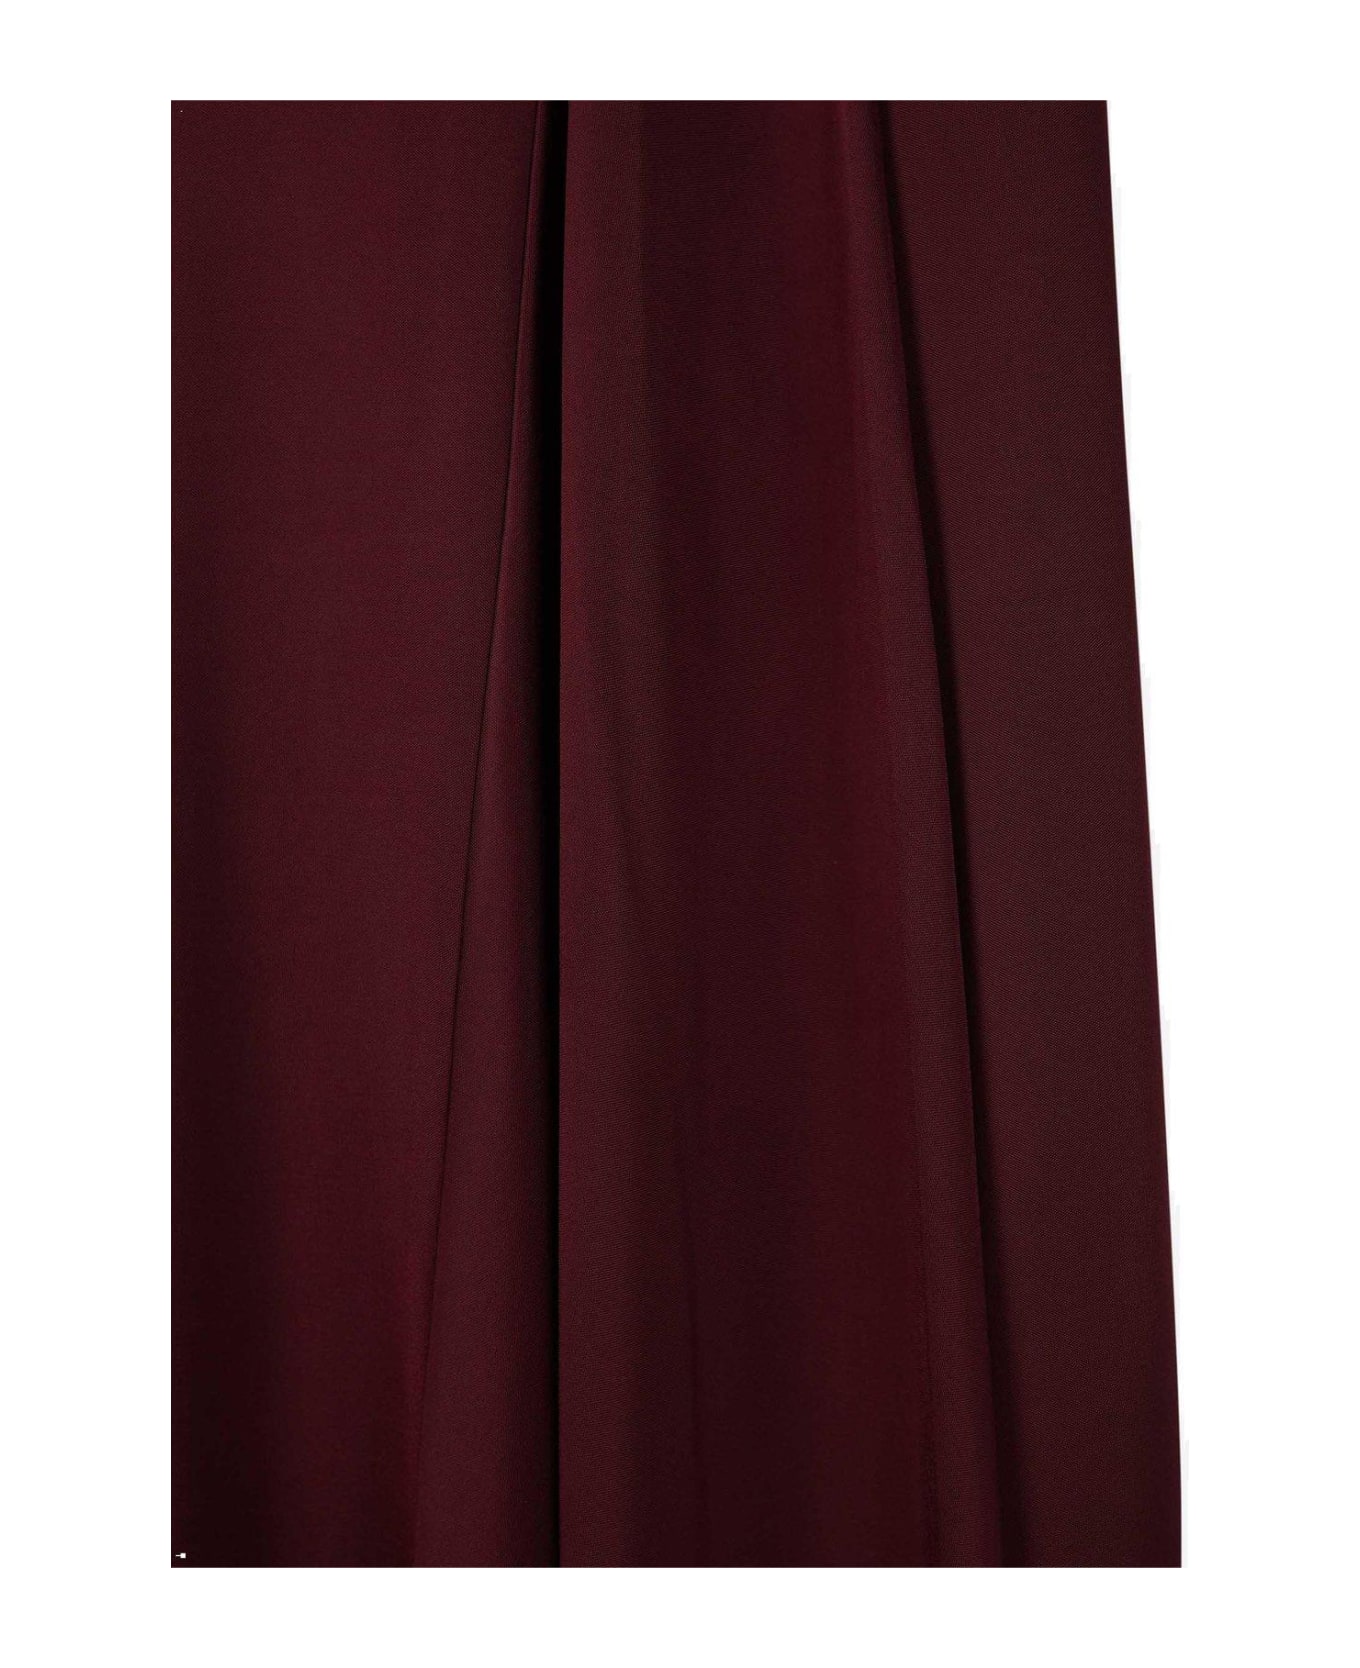 Stella McCartney One-shoulder Cape Gown - RED